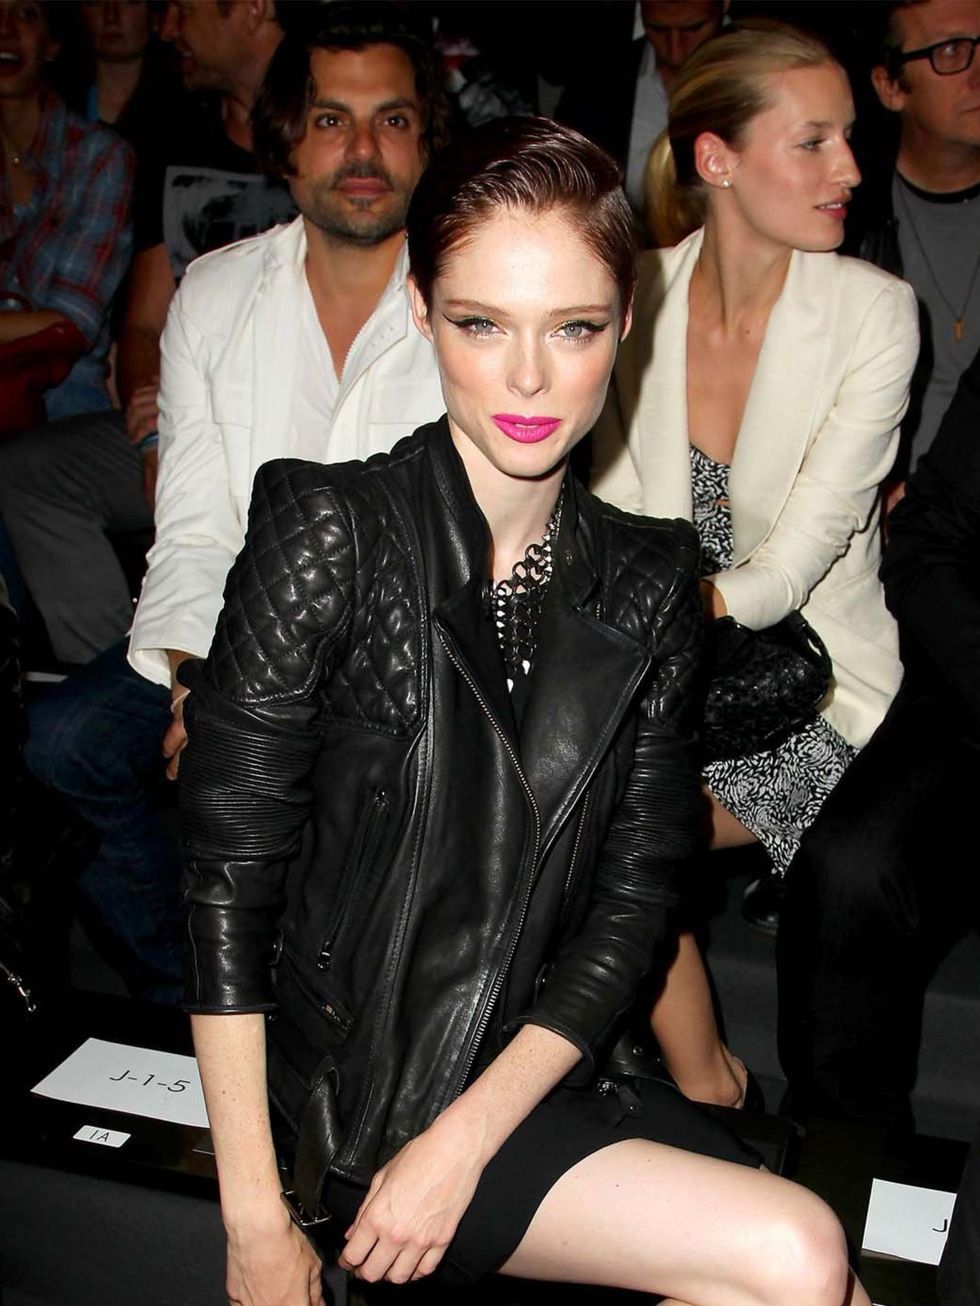 <p><a href="http://www.elleuk.com/star-style/celebrity-style-files/coco-rocha">Coco Rocha</a> at <a href="http://www.elleuk.com/elle-tv/catwalk/diesel-black-gold-spring-summer-2014-new-york-fashion-week">Diesel Black Gold</a>, New York</p>